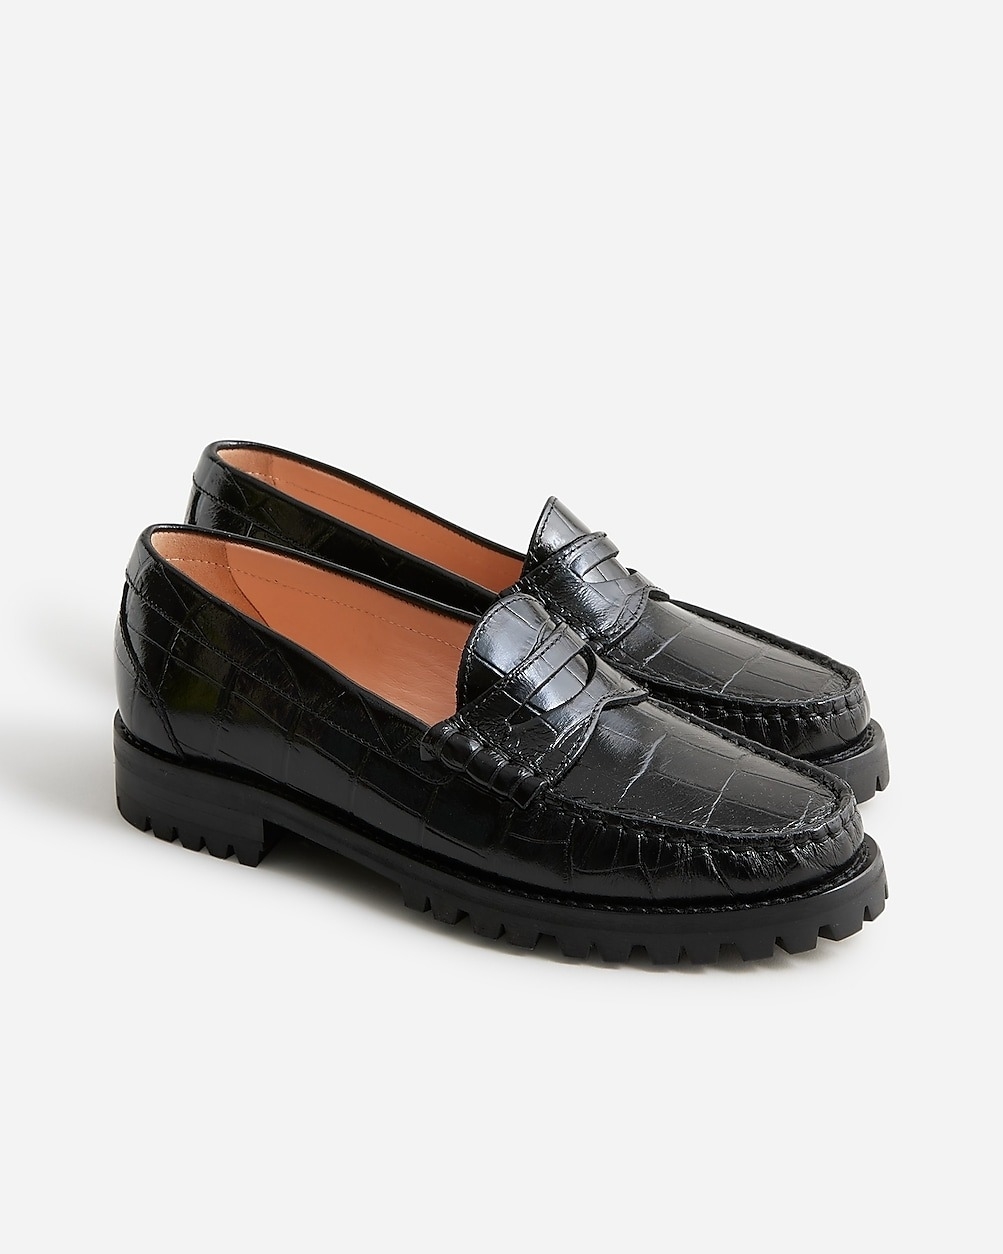 A pair of black loafers with chunky soles displayed against a neutral background